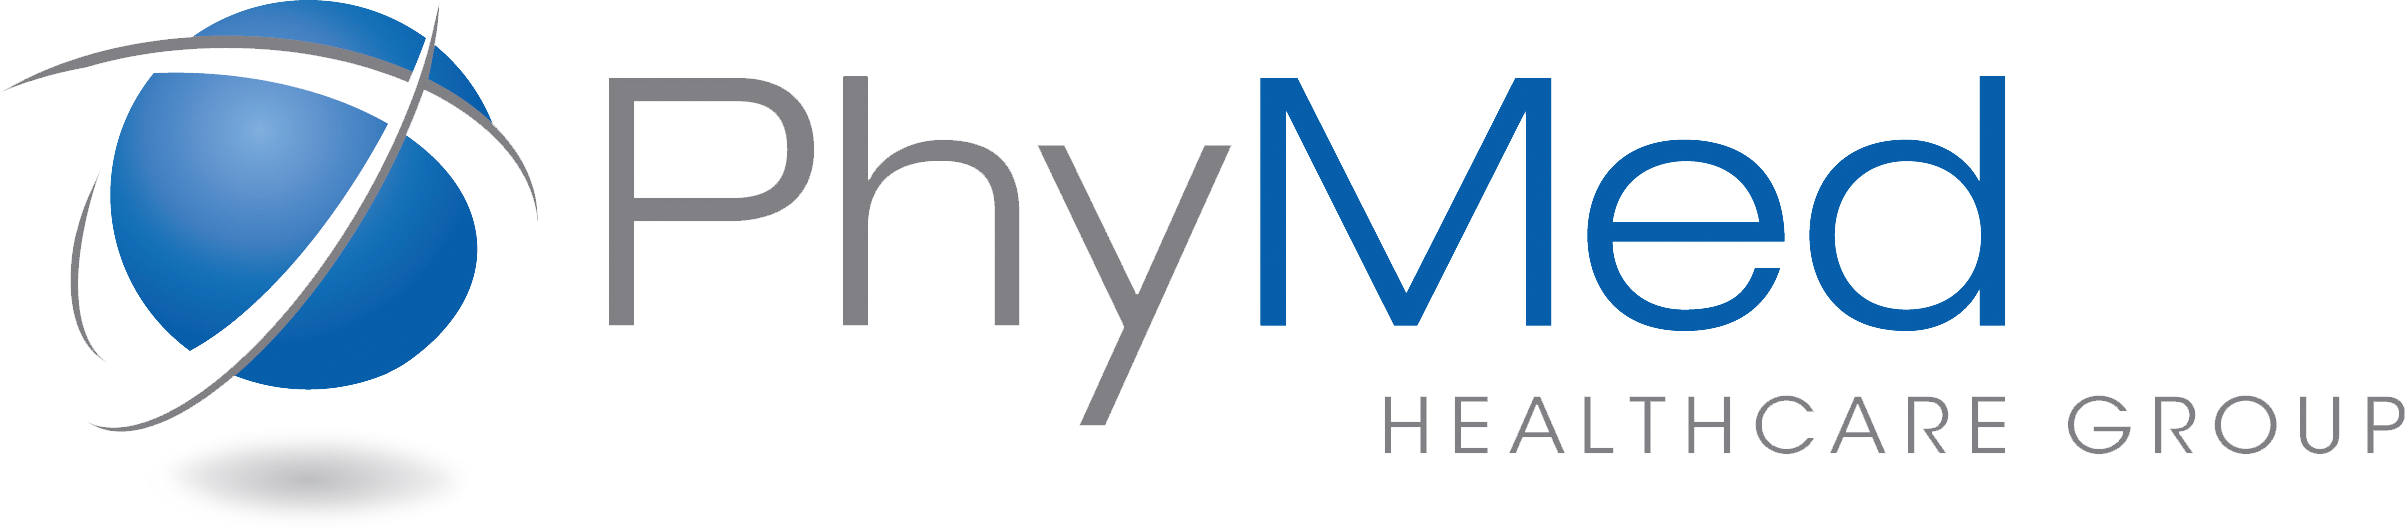 Phymed Healthcare Group